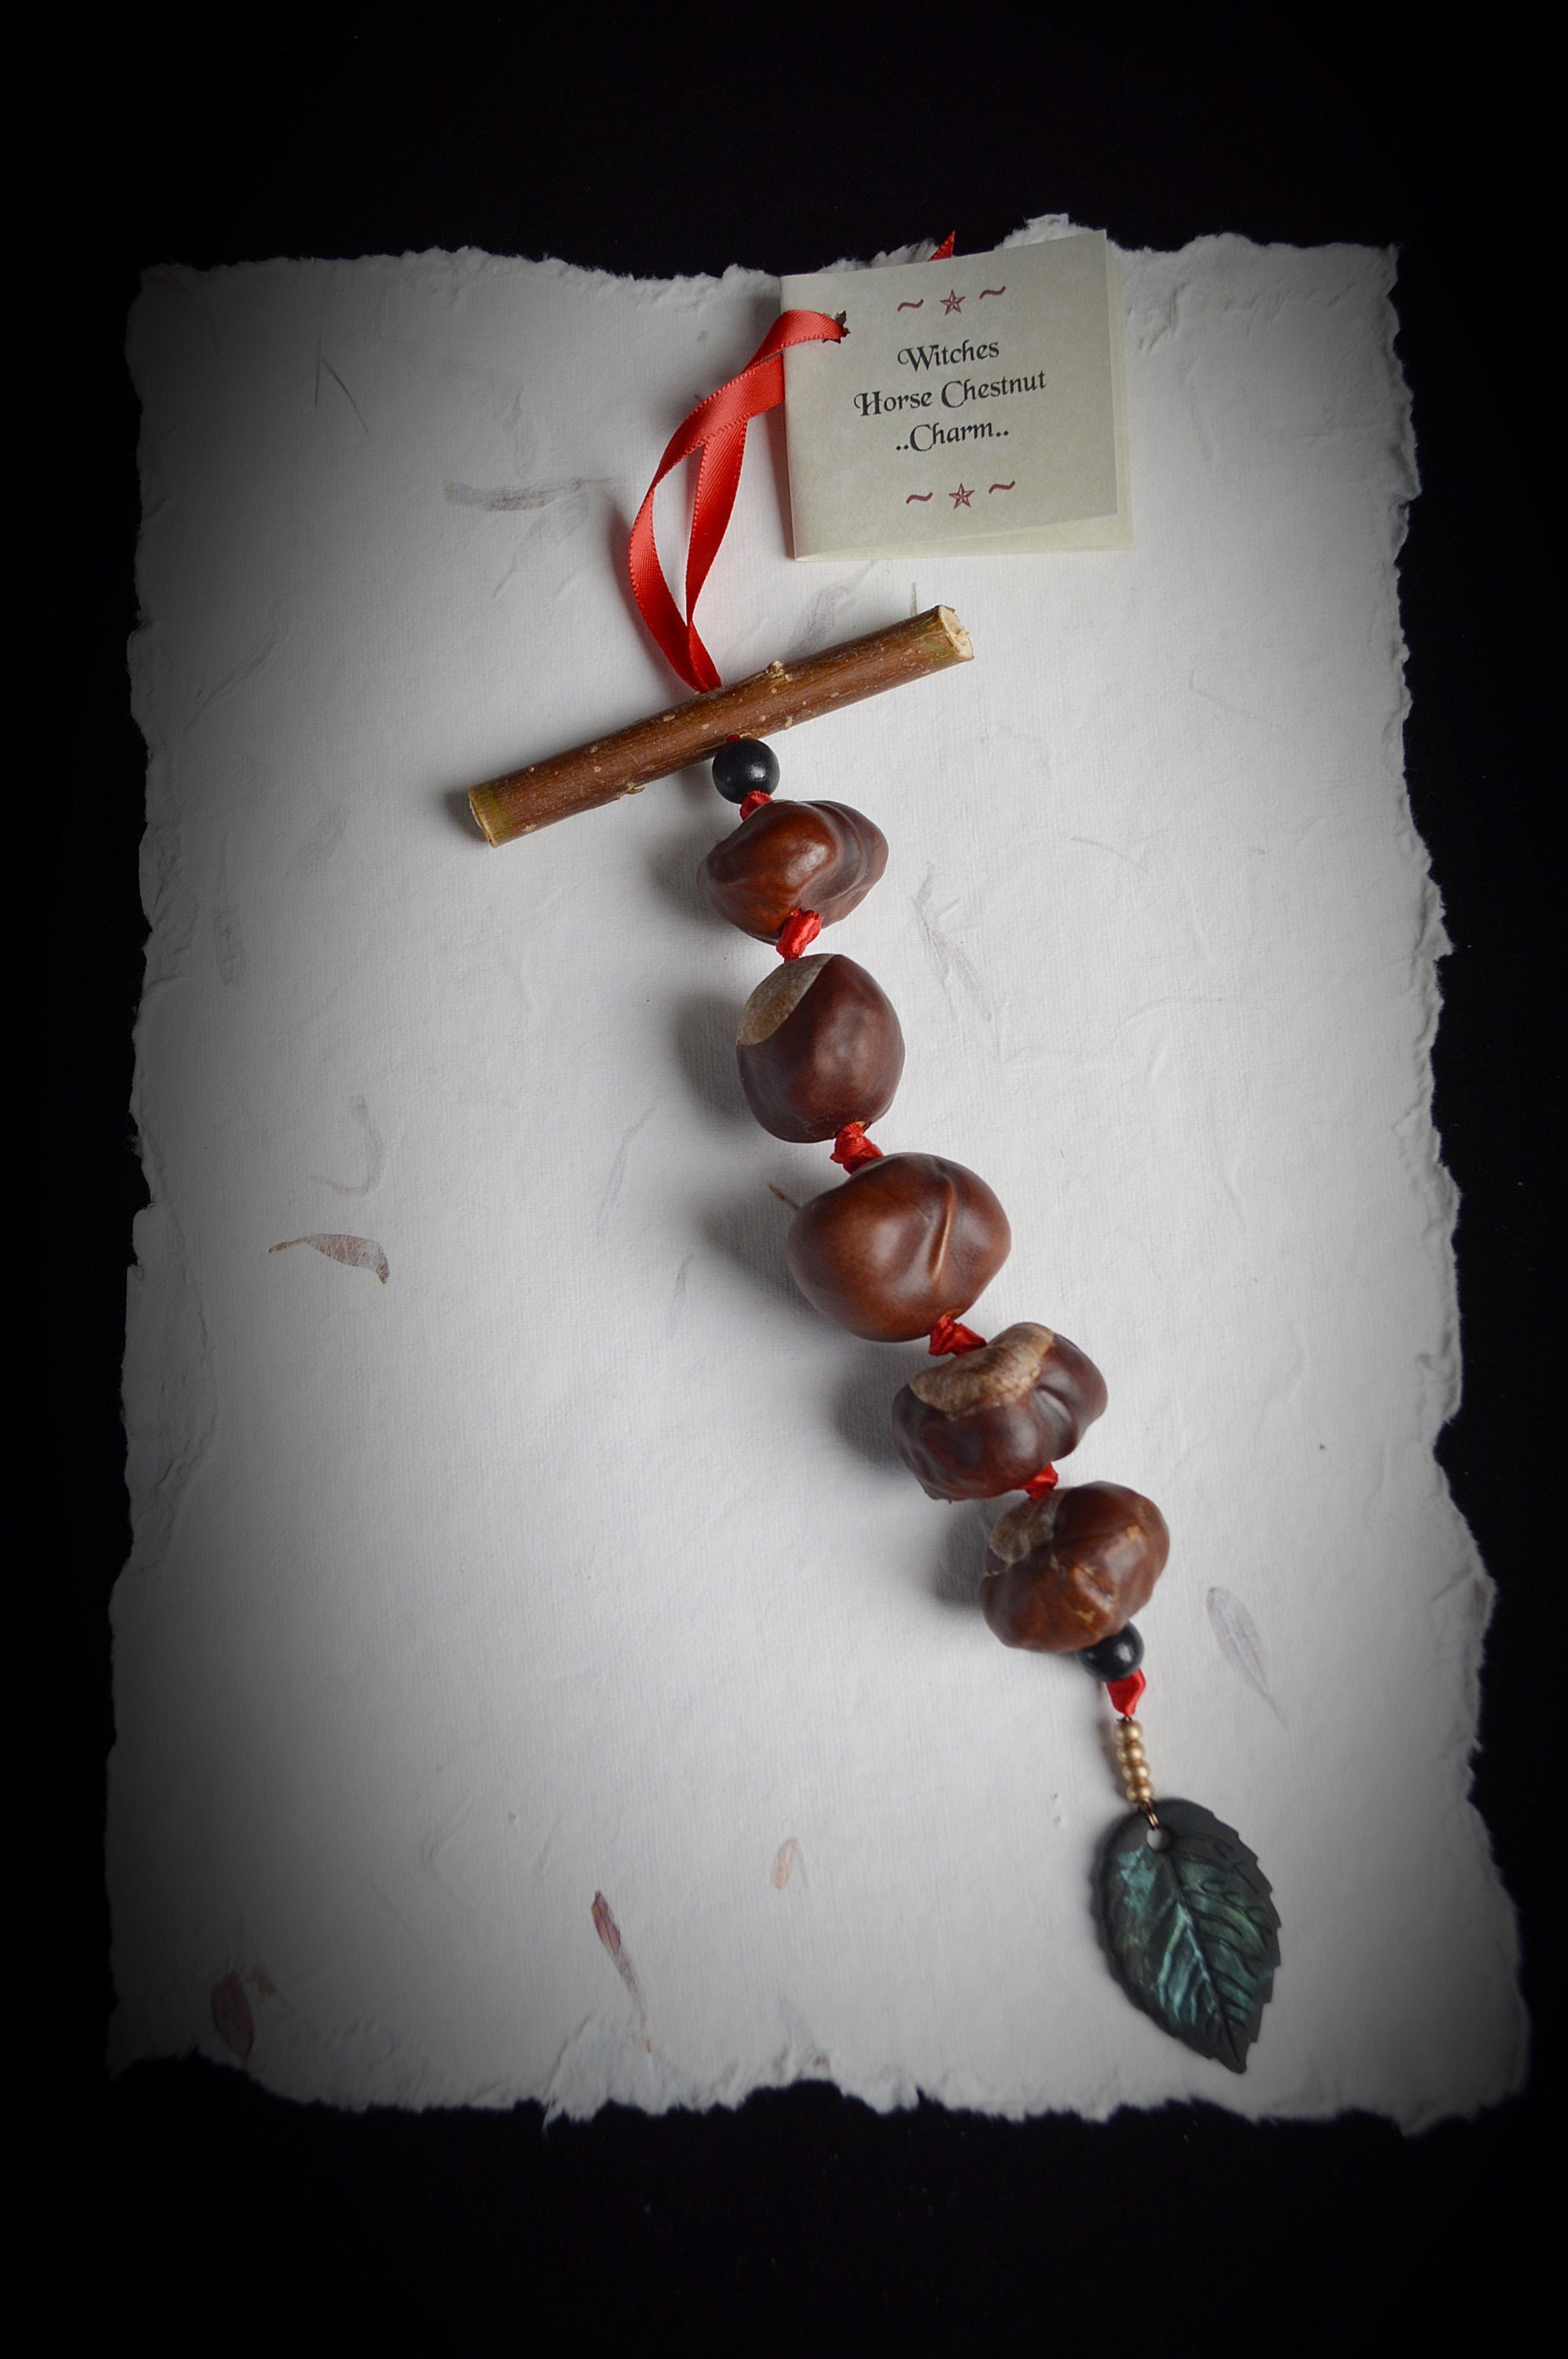 Witches Horse Chestnut Charm for Wealth & Success!